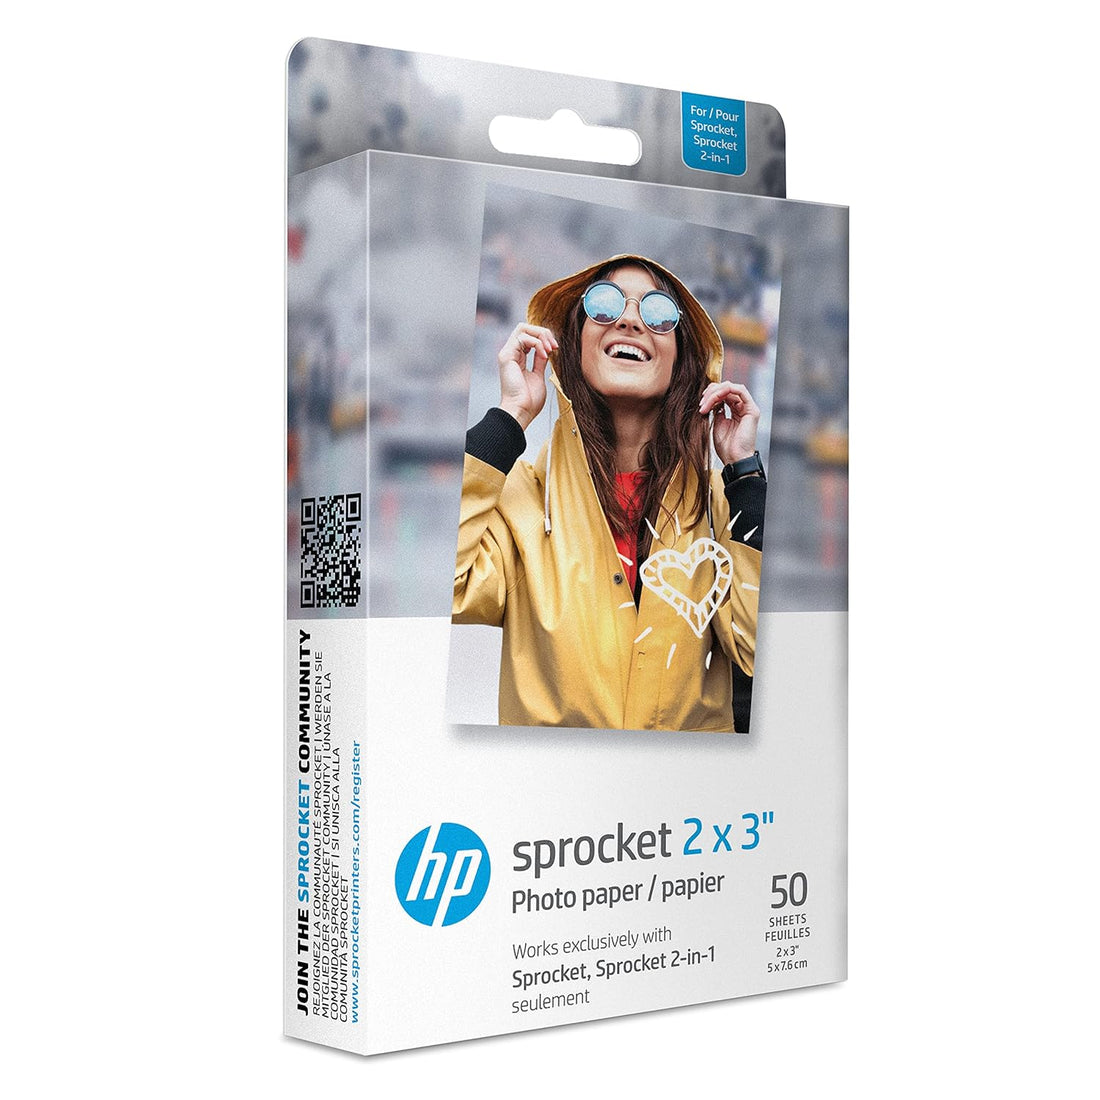 HP Sprocket Photo Paper for Sprocket Portable Photo Printer, (2x3-inch), Sticky-Backed 50 sheets